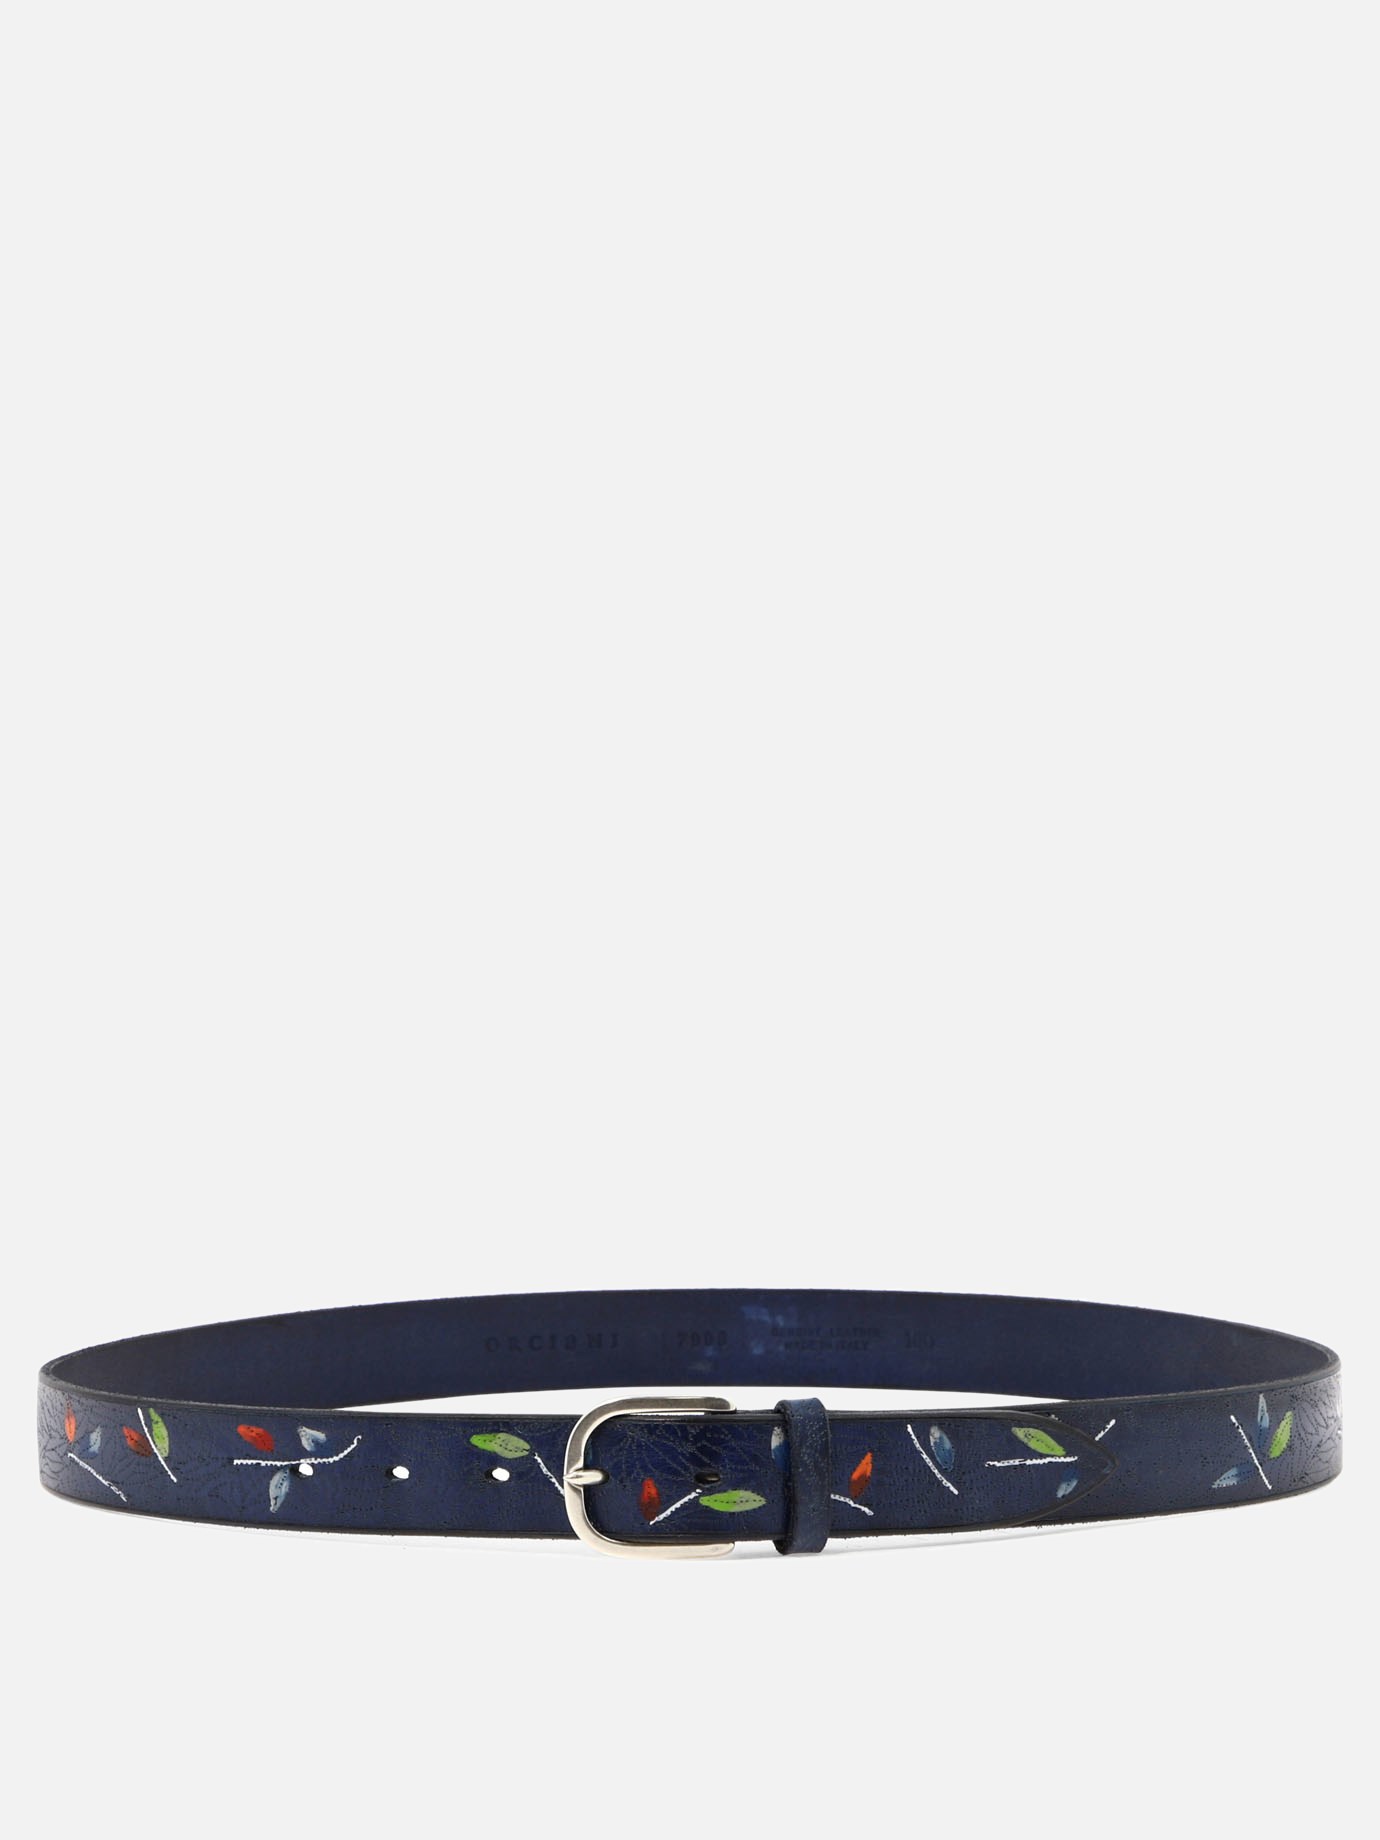  Bamboo  beltby Orciani - 1